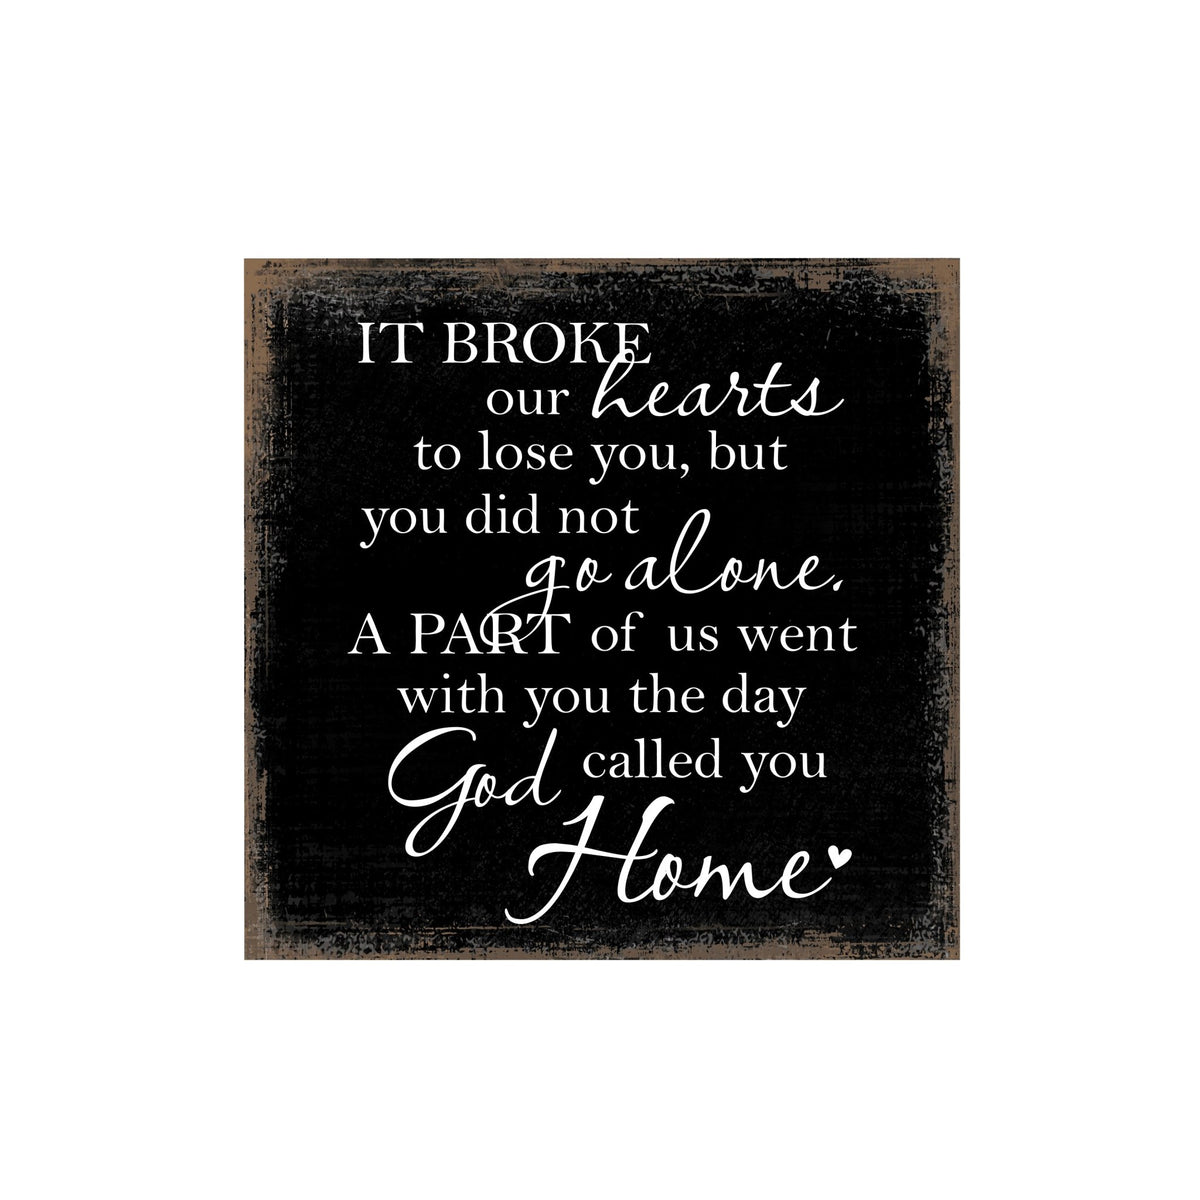 Modern Inspirational 6x6in Wooden Sign (It Broke Our Hearts) Memorial Plaque Tabletop and shelf decor Family Home Decoration - LifeSong Milestones